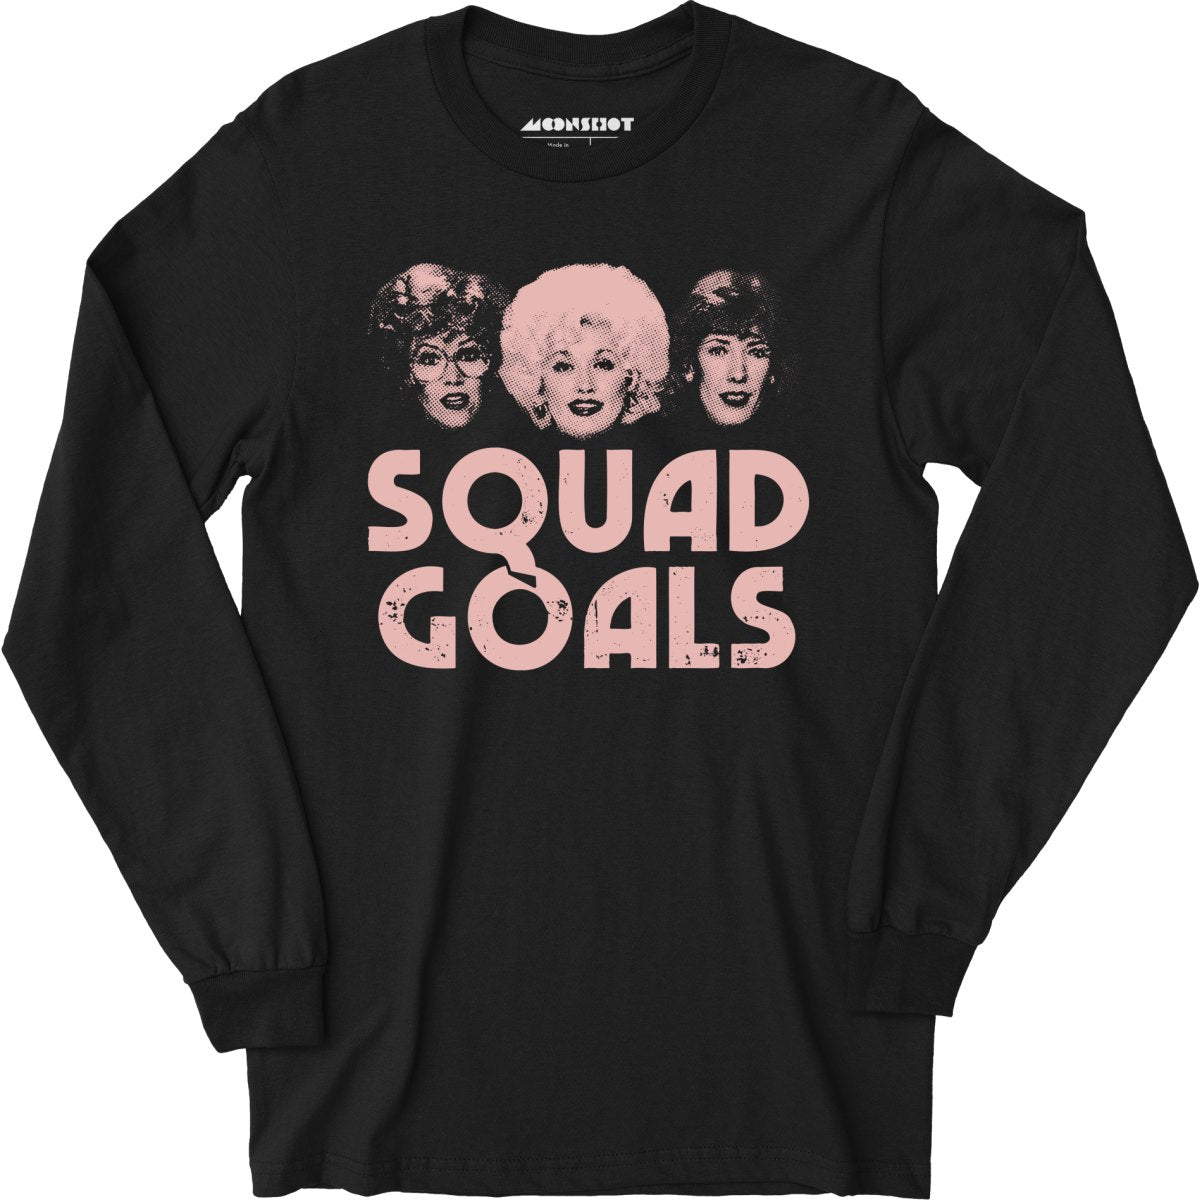 Squad Goals 9 to 5 - Long Sleeve T-Shirt